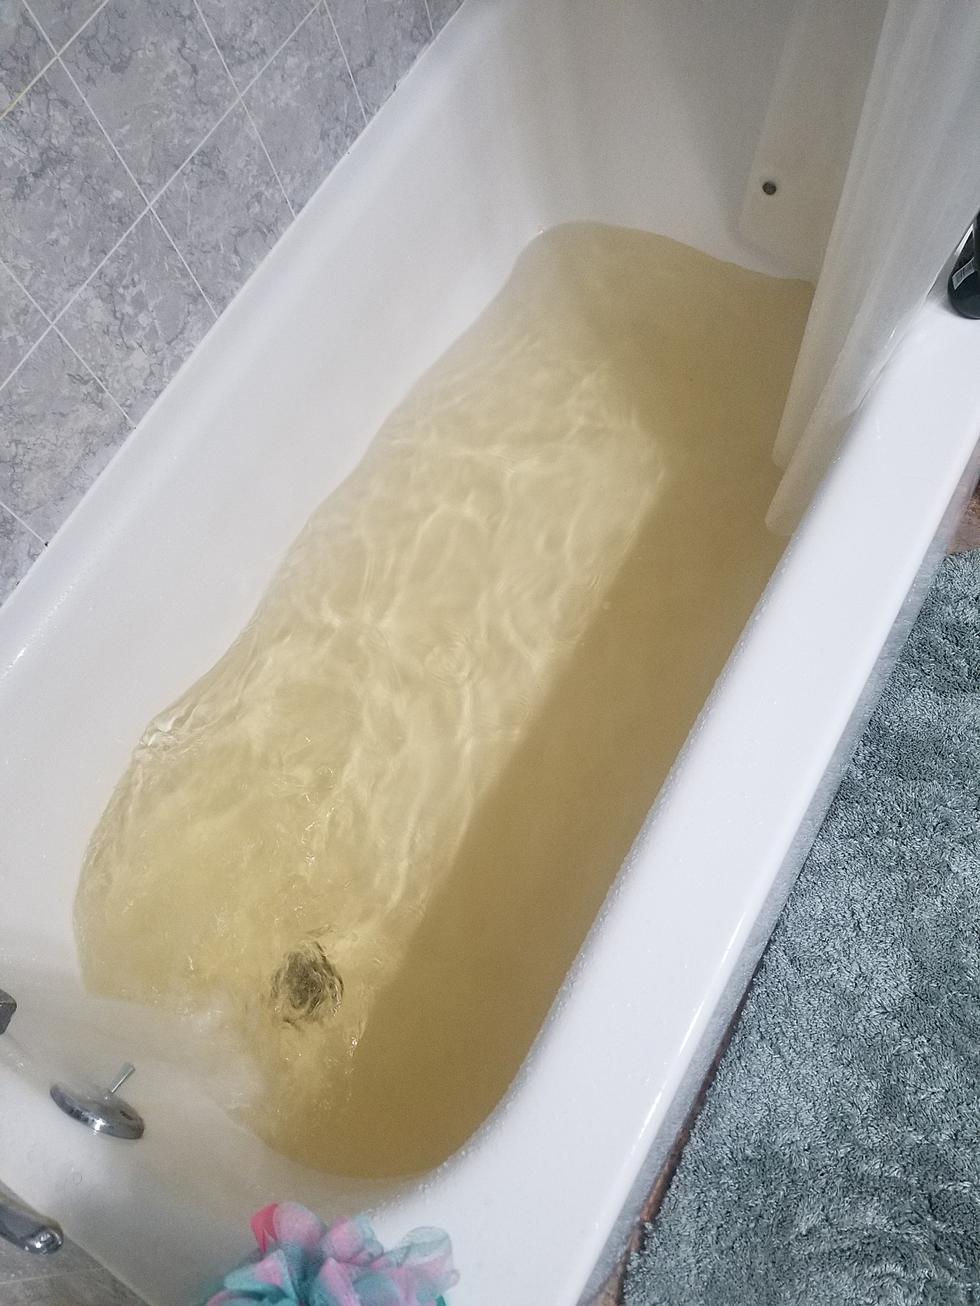 Coldwater, MI Residents Complain of Dirty Tap Water